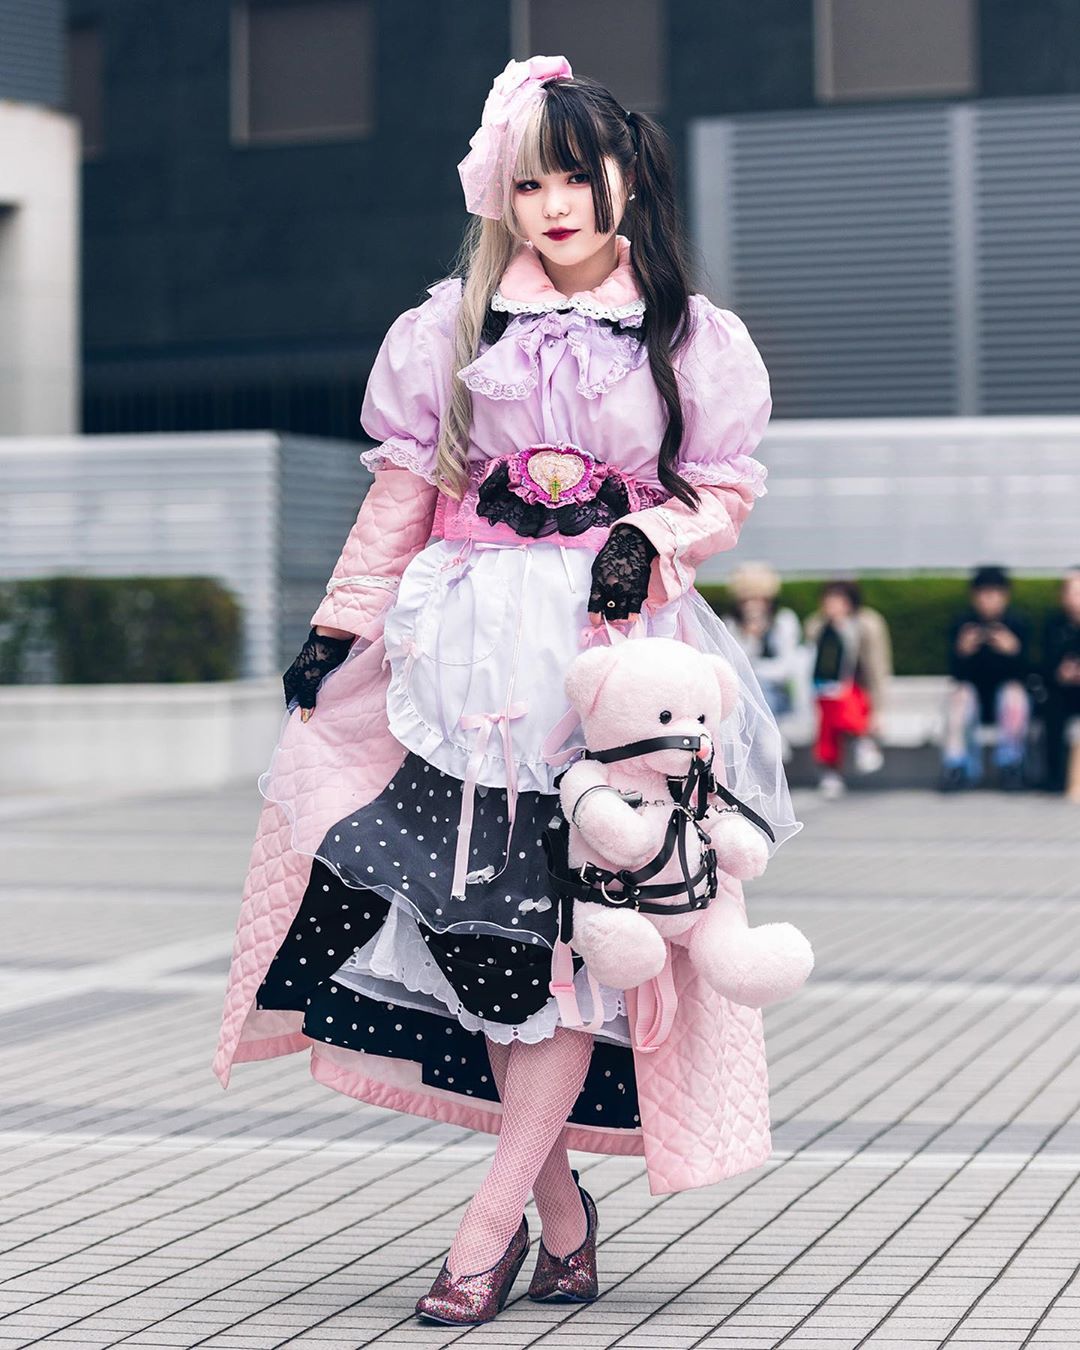 Tokyo Fashion on X: Japanese student Mako on the street in